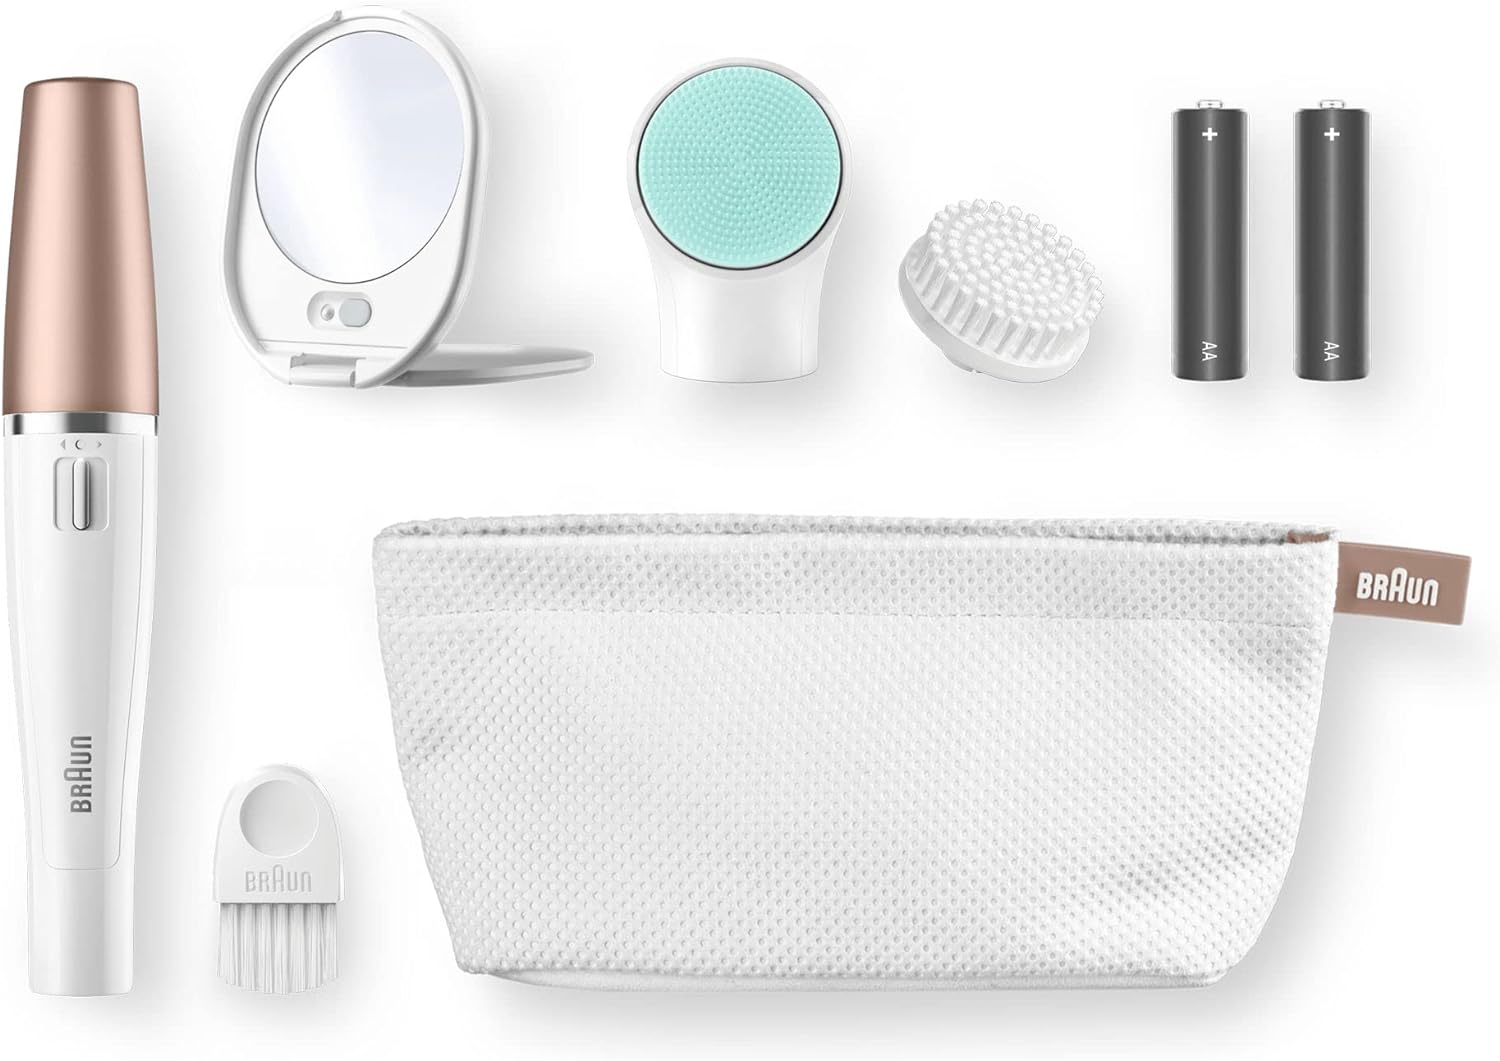 Braun FaceSpa Face Epilator, Hair Removal with Facial Cleansing Brush Head, Lighted Mirror and Beauty Pouch, 851V, White